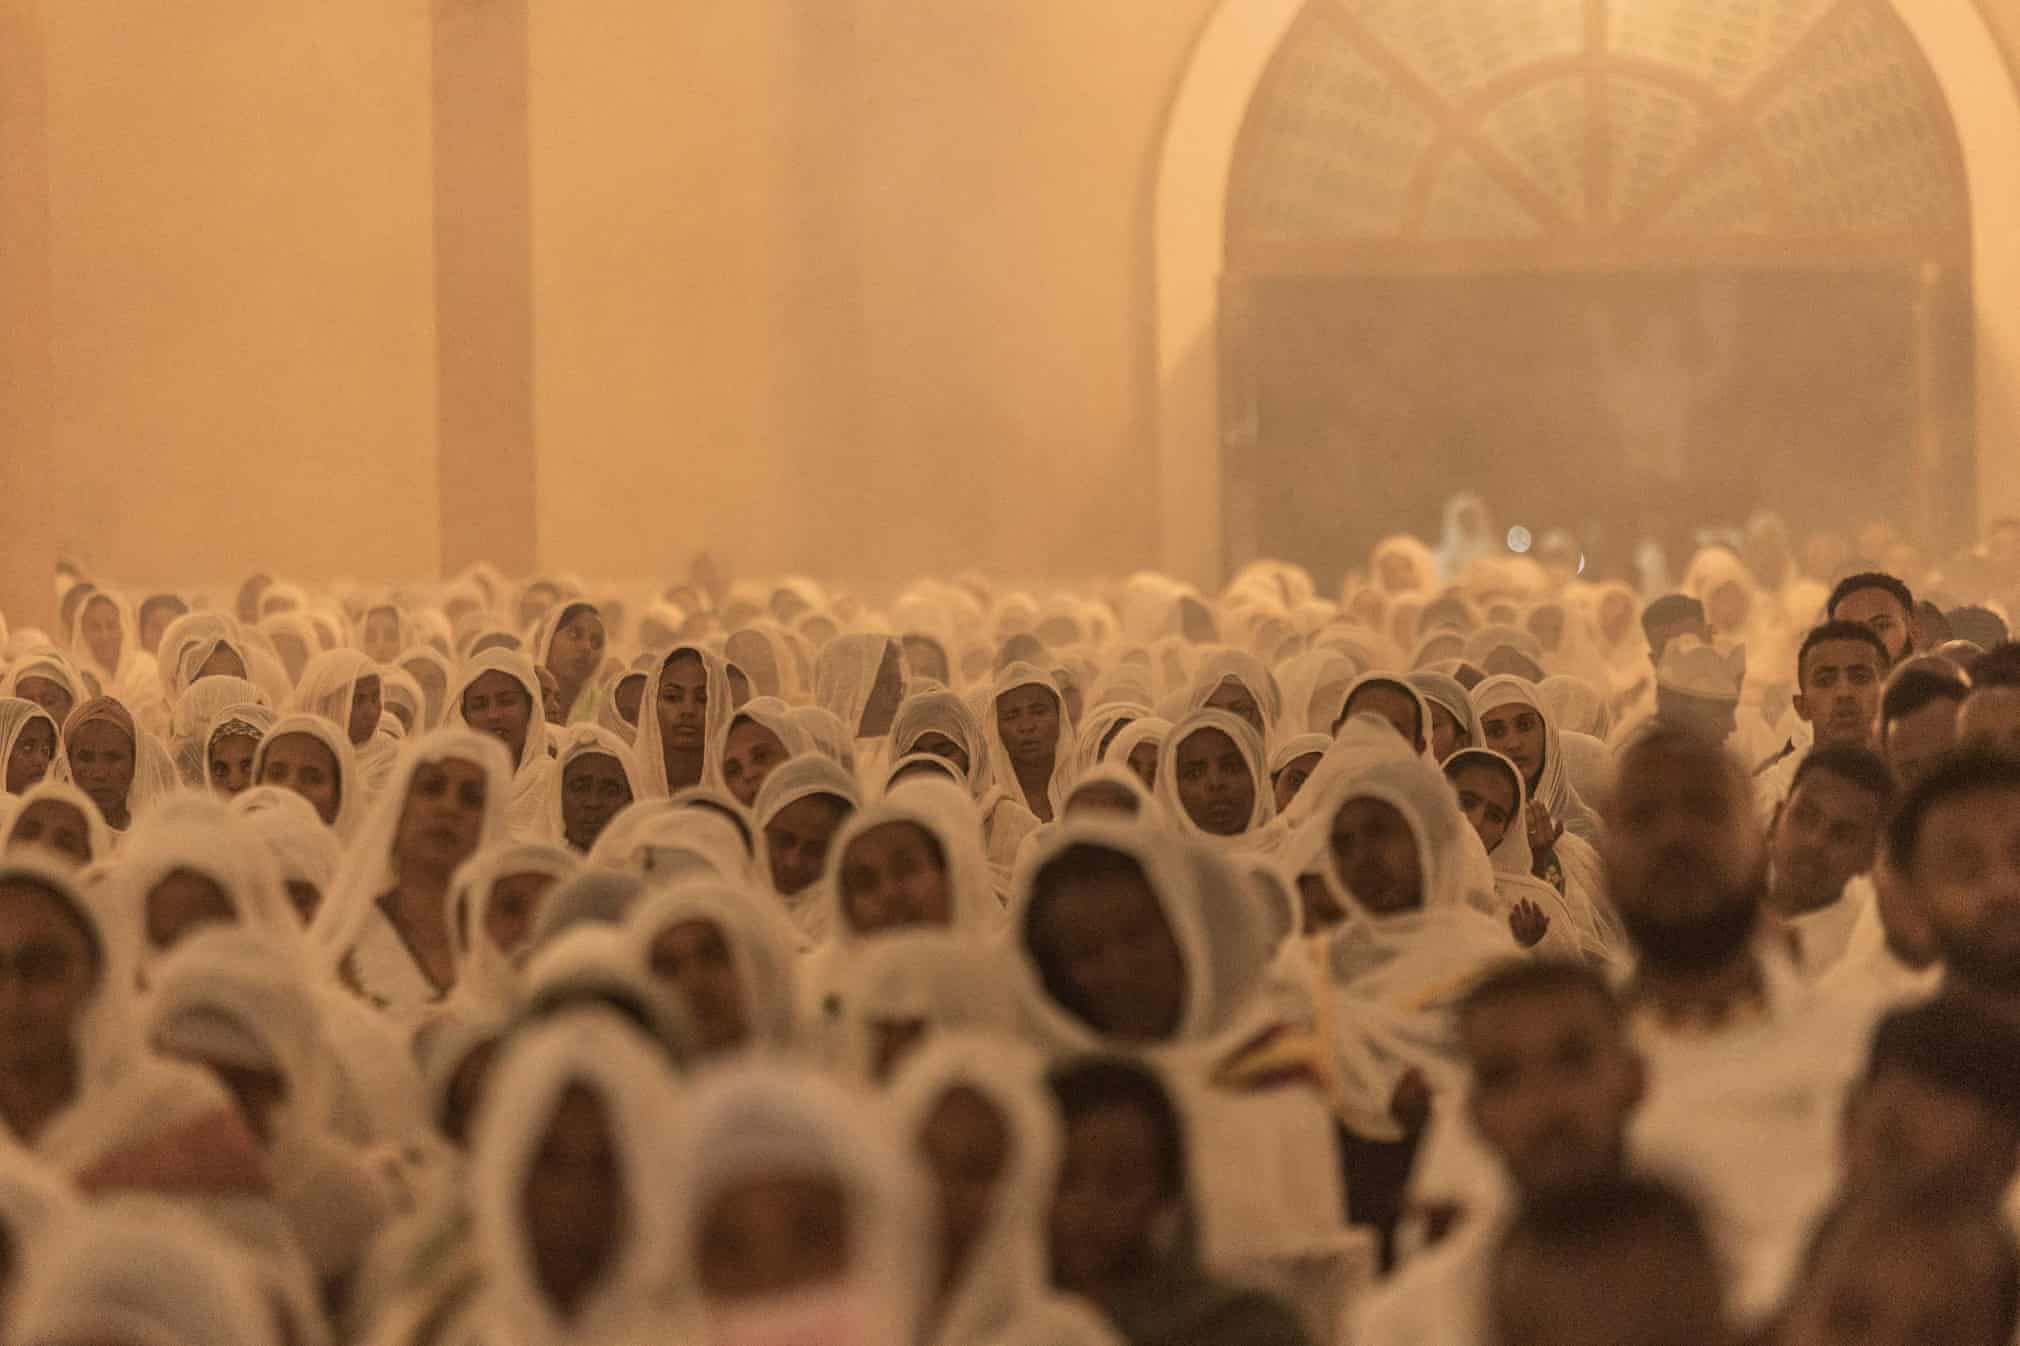 Addis Ababa, Ethiopia Ethiopian Orthodox devotees pray during the celebration of Easter at Bole Medhanialem church in Addis Ababa. Ethiopian Easter, also known as Fasika in Amharic, commemorates Jesus’s resurrection and marks the end of a 55-day fast among Orthodox believers Photograph: Amanuel Sileshi/AFP/Getty Images